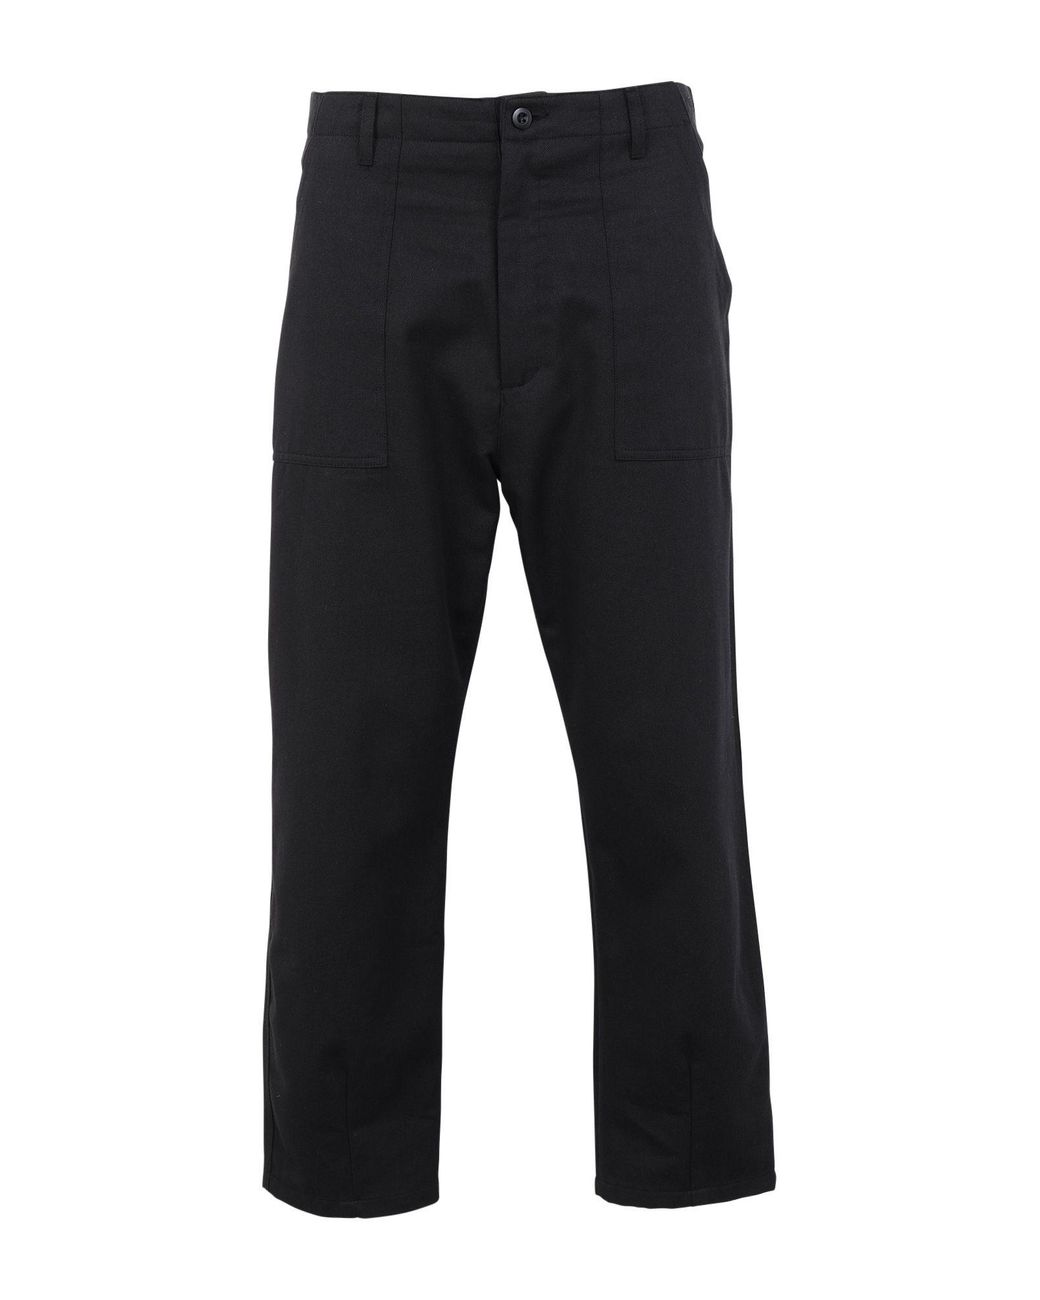 Caterpillar Synthetic Casual Pants in Black for Men - Lyst